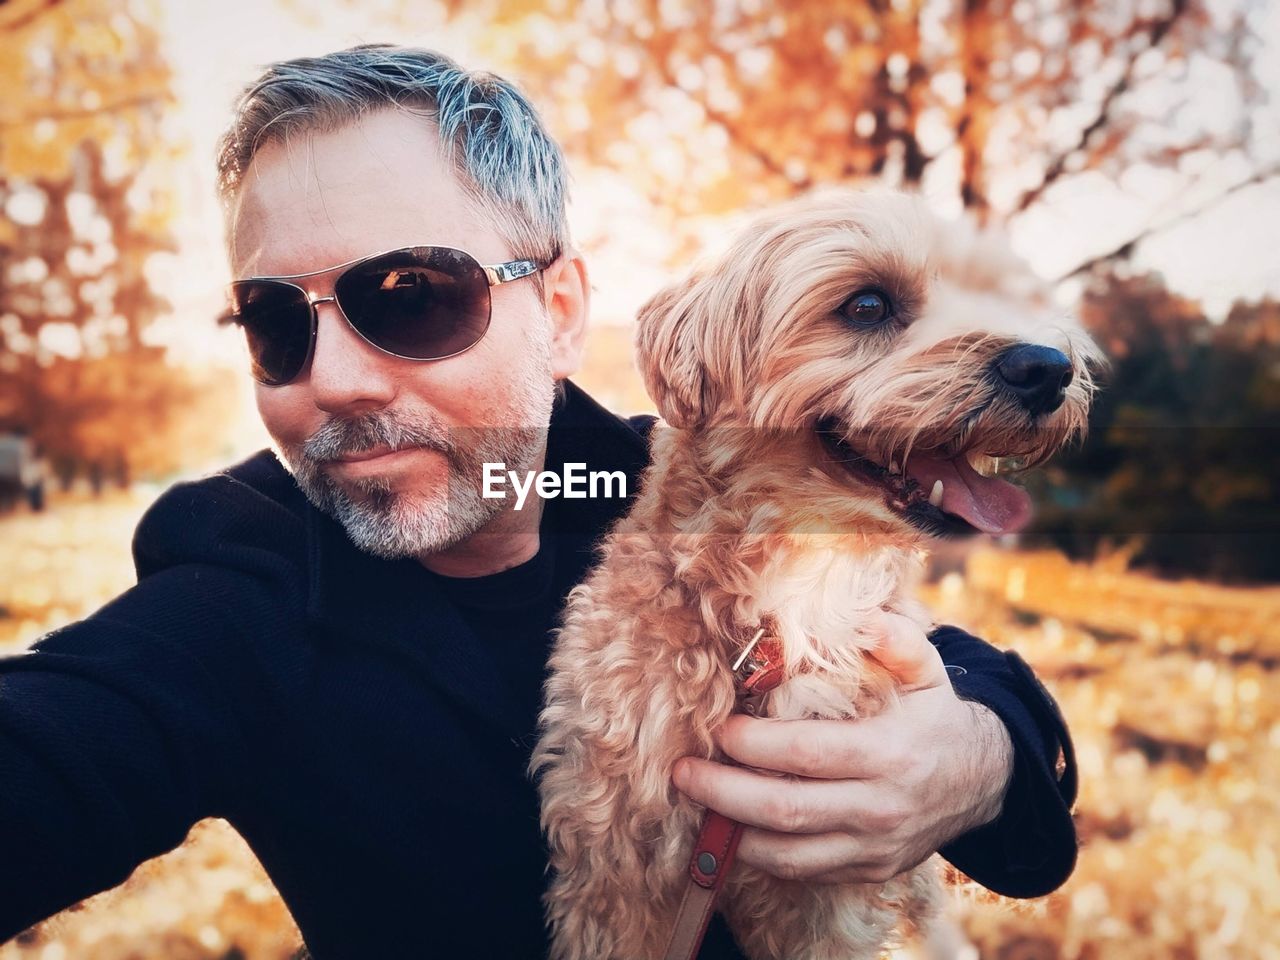 dog, canine, one animal, pet, domestic animals, mammal, animal themes, animal, adult, sunglasses, men, glasses, one person, fashion, smiling, happiness, friendship, portrait, nature, autumn, emotion, positive emotion, beard, lifestyles, facial hair, sunlight, love, mature adult, tree, outdoors, gray hair, cheerful, leisure activity, lap dog, bonding, holding, senior adult, embracing